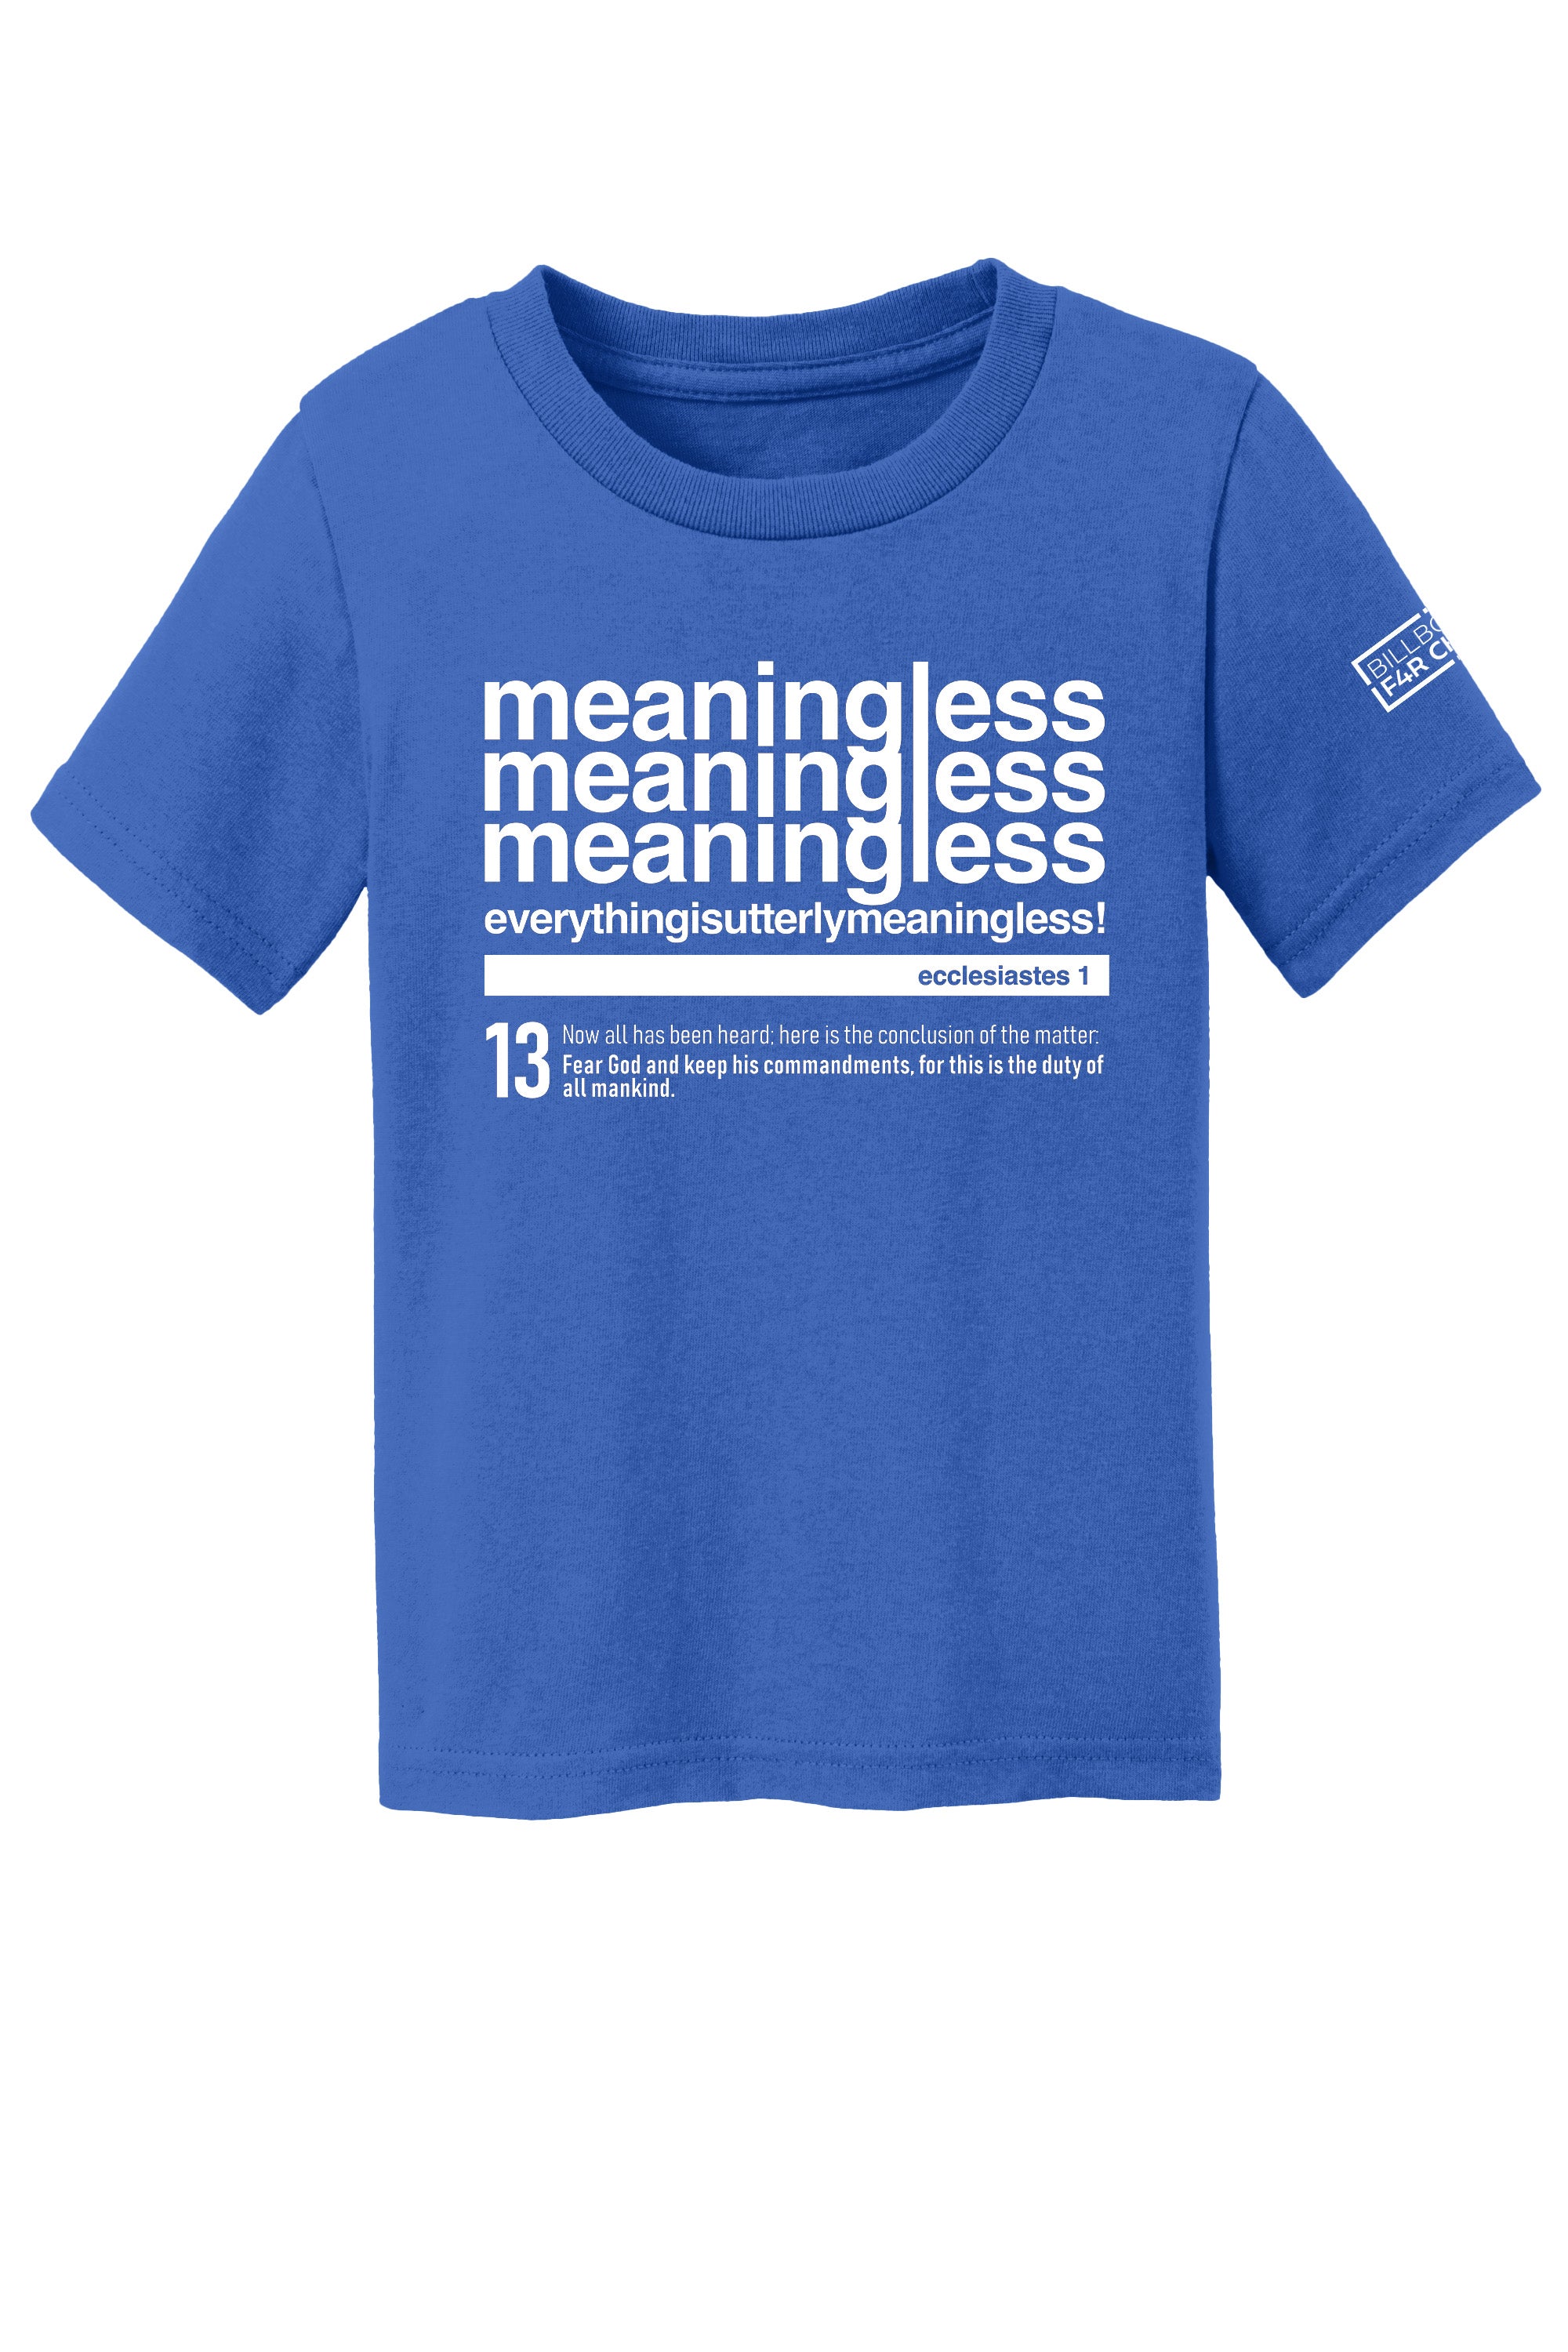 Meaningless 3 Toddler T-Shirt